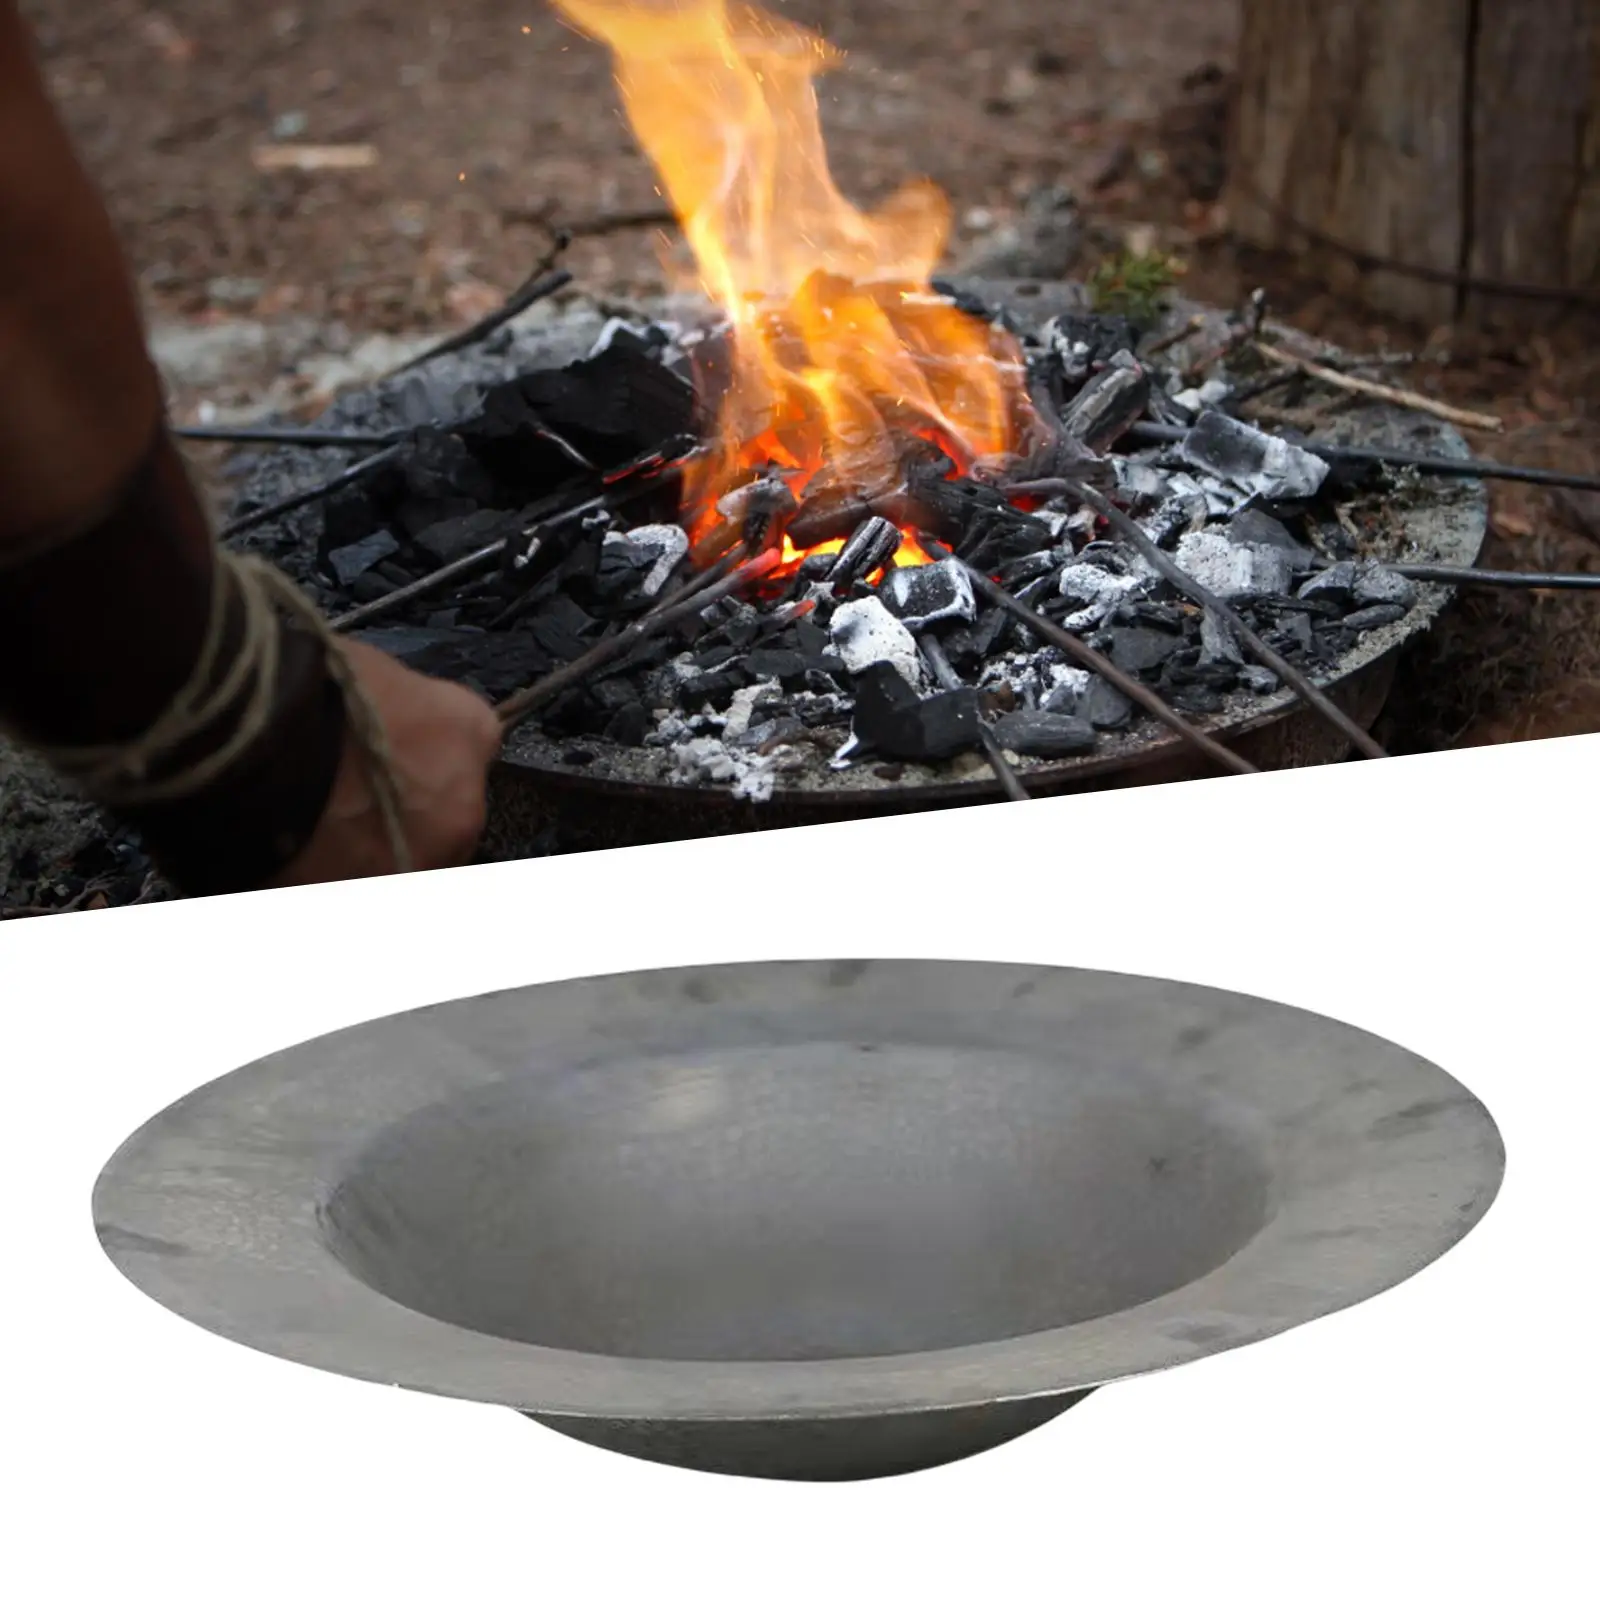 Portable Fire Bowl Camping Charcoal Stove Wood Burning Burner Sturdy Cast Iron Firewood for Courtyard Backyard Outdoor Fishing